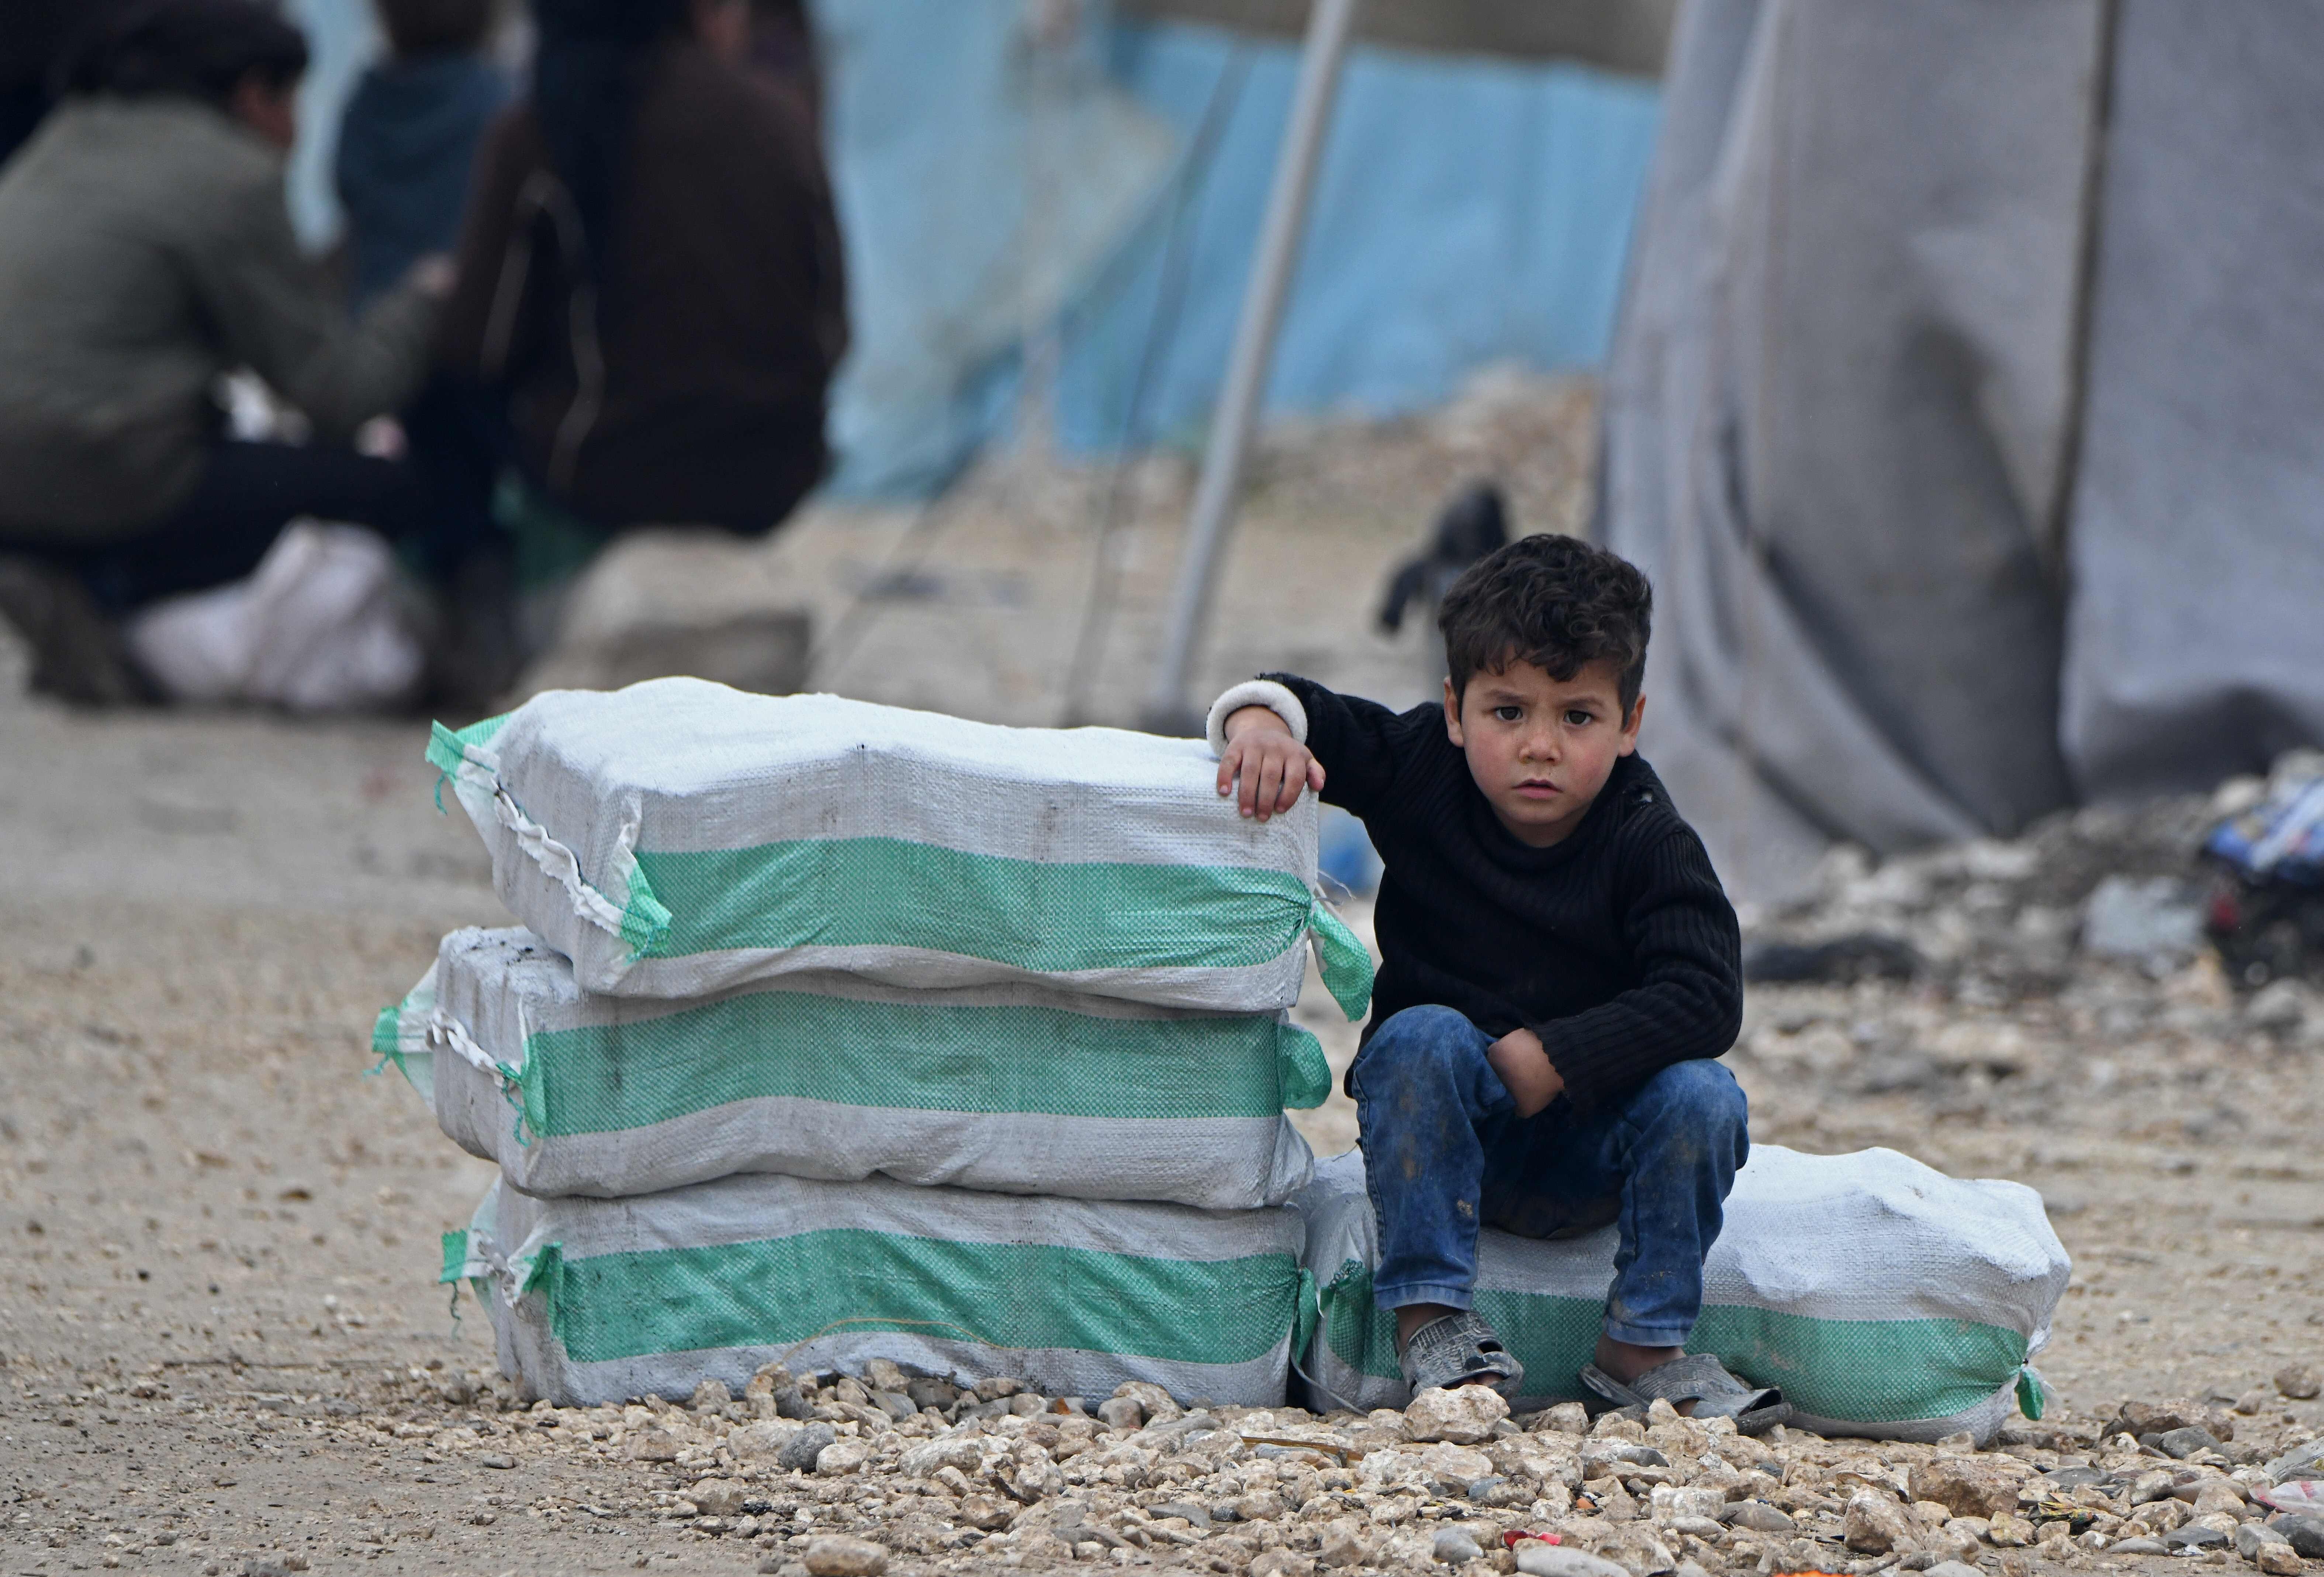 A Syrian boy sits next to humanitarian aid in a camp on February 21. A UN Security Council resolution for a global ceasefire to allow coronavirus aid to the most vulnerable is mired in disagreement. Photo: AFP